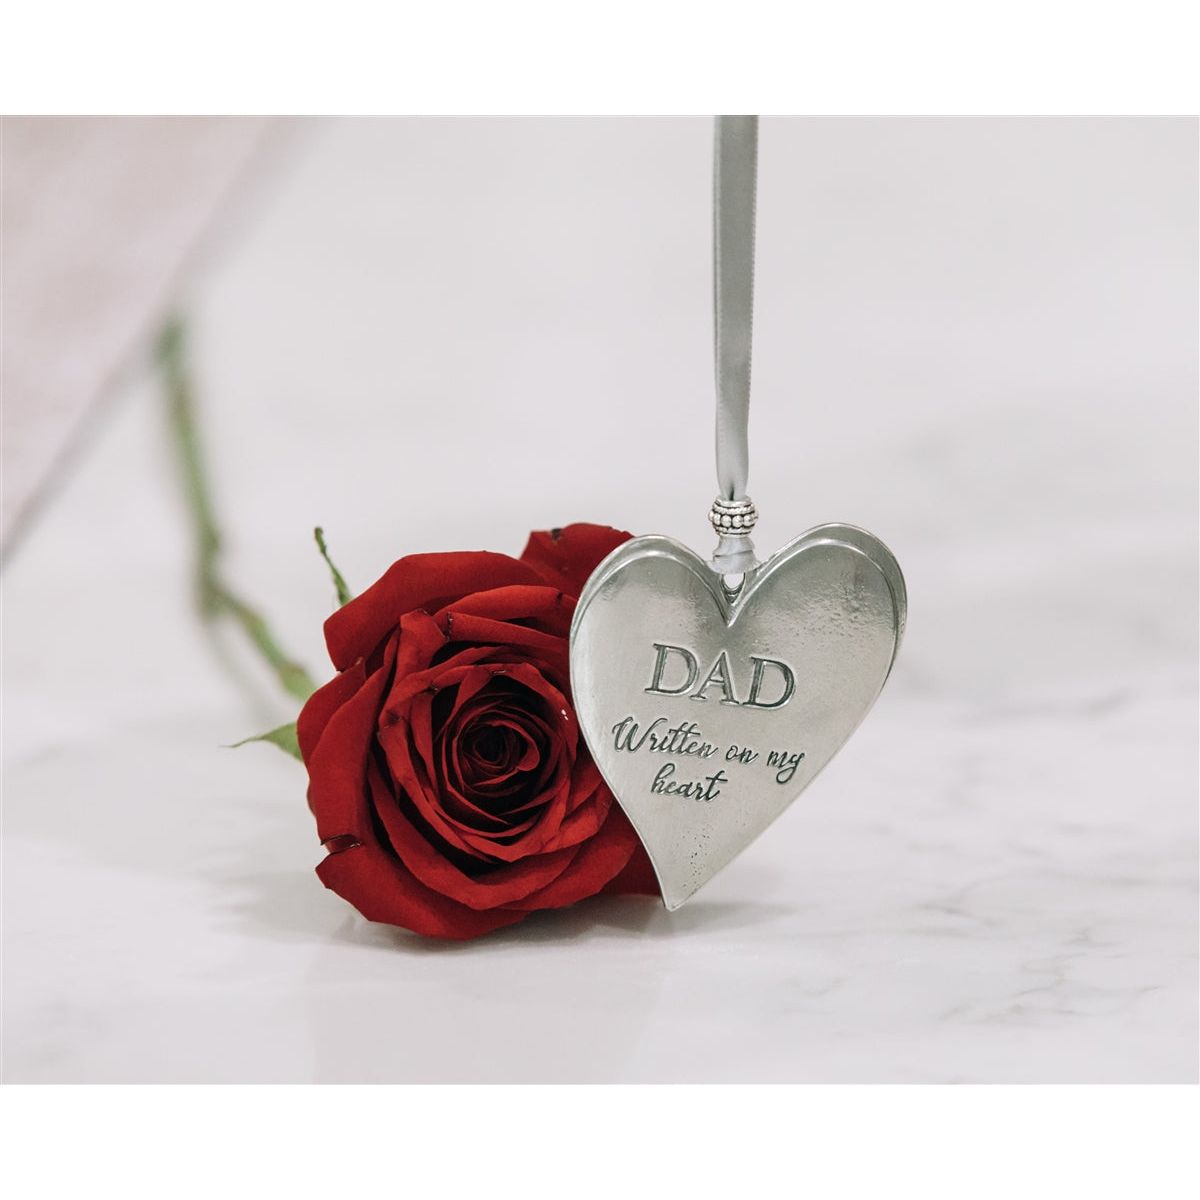 Dad pewter heart hanging from gray satin ribbon.